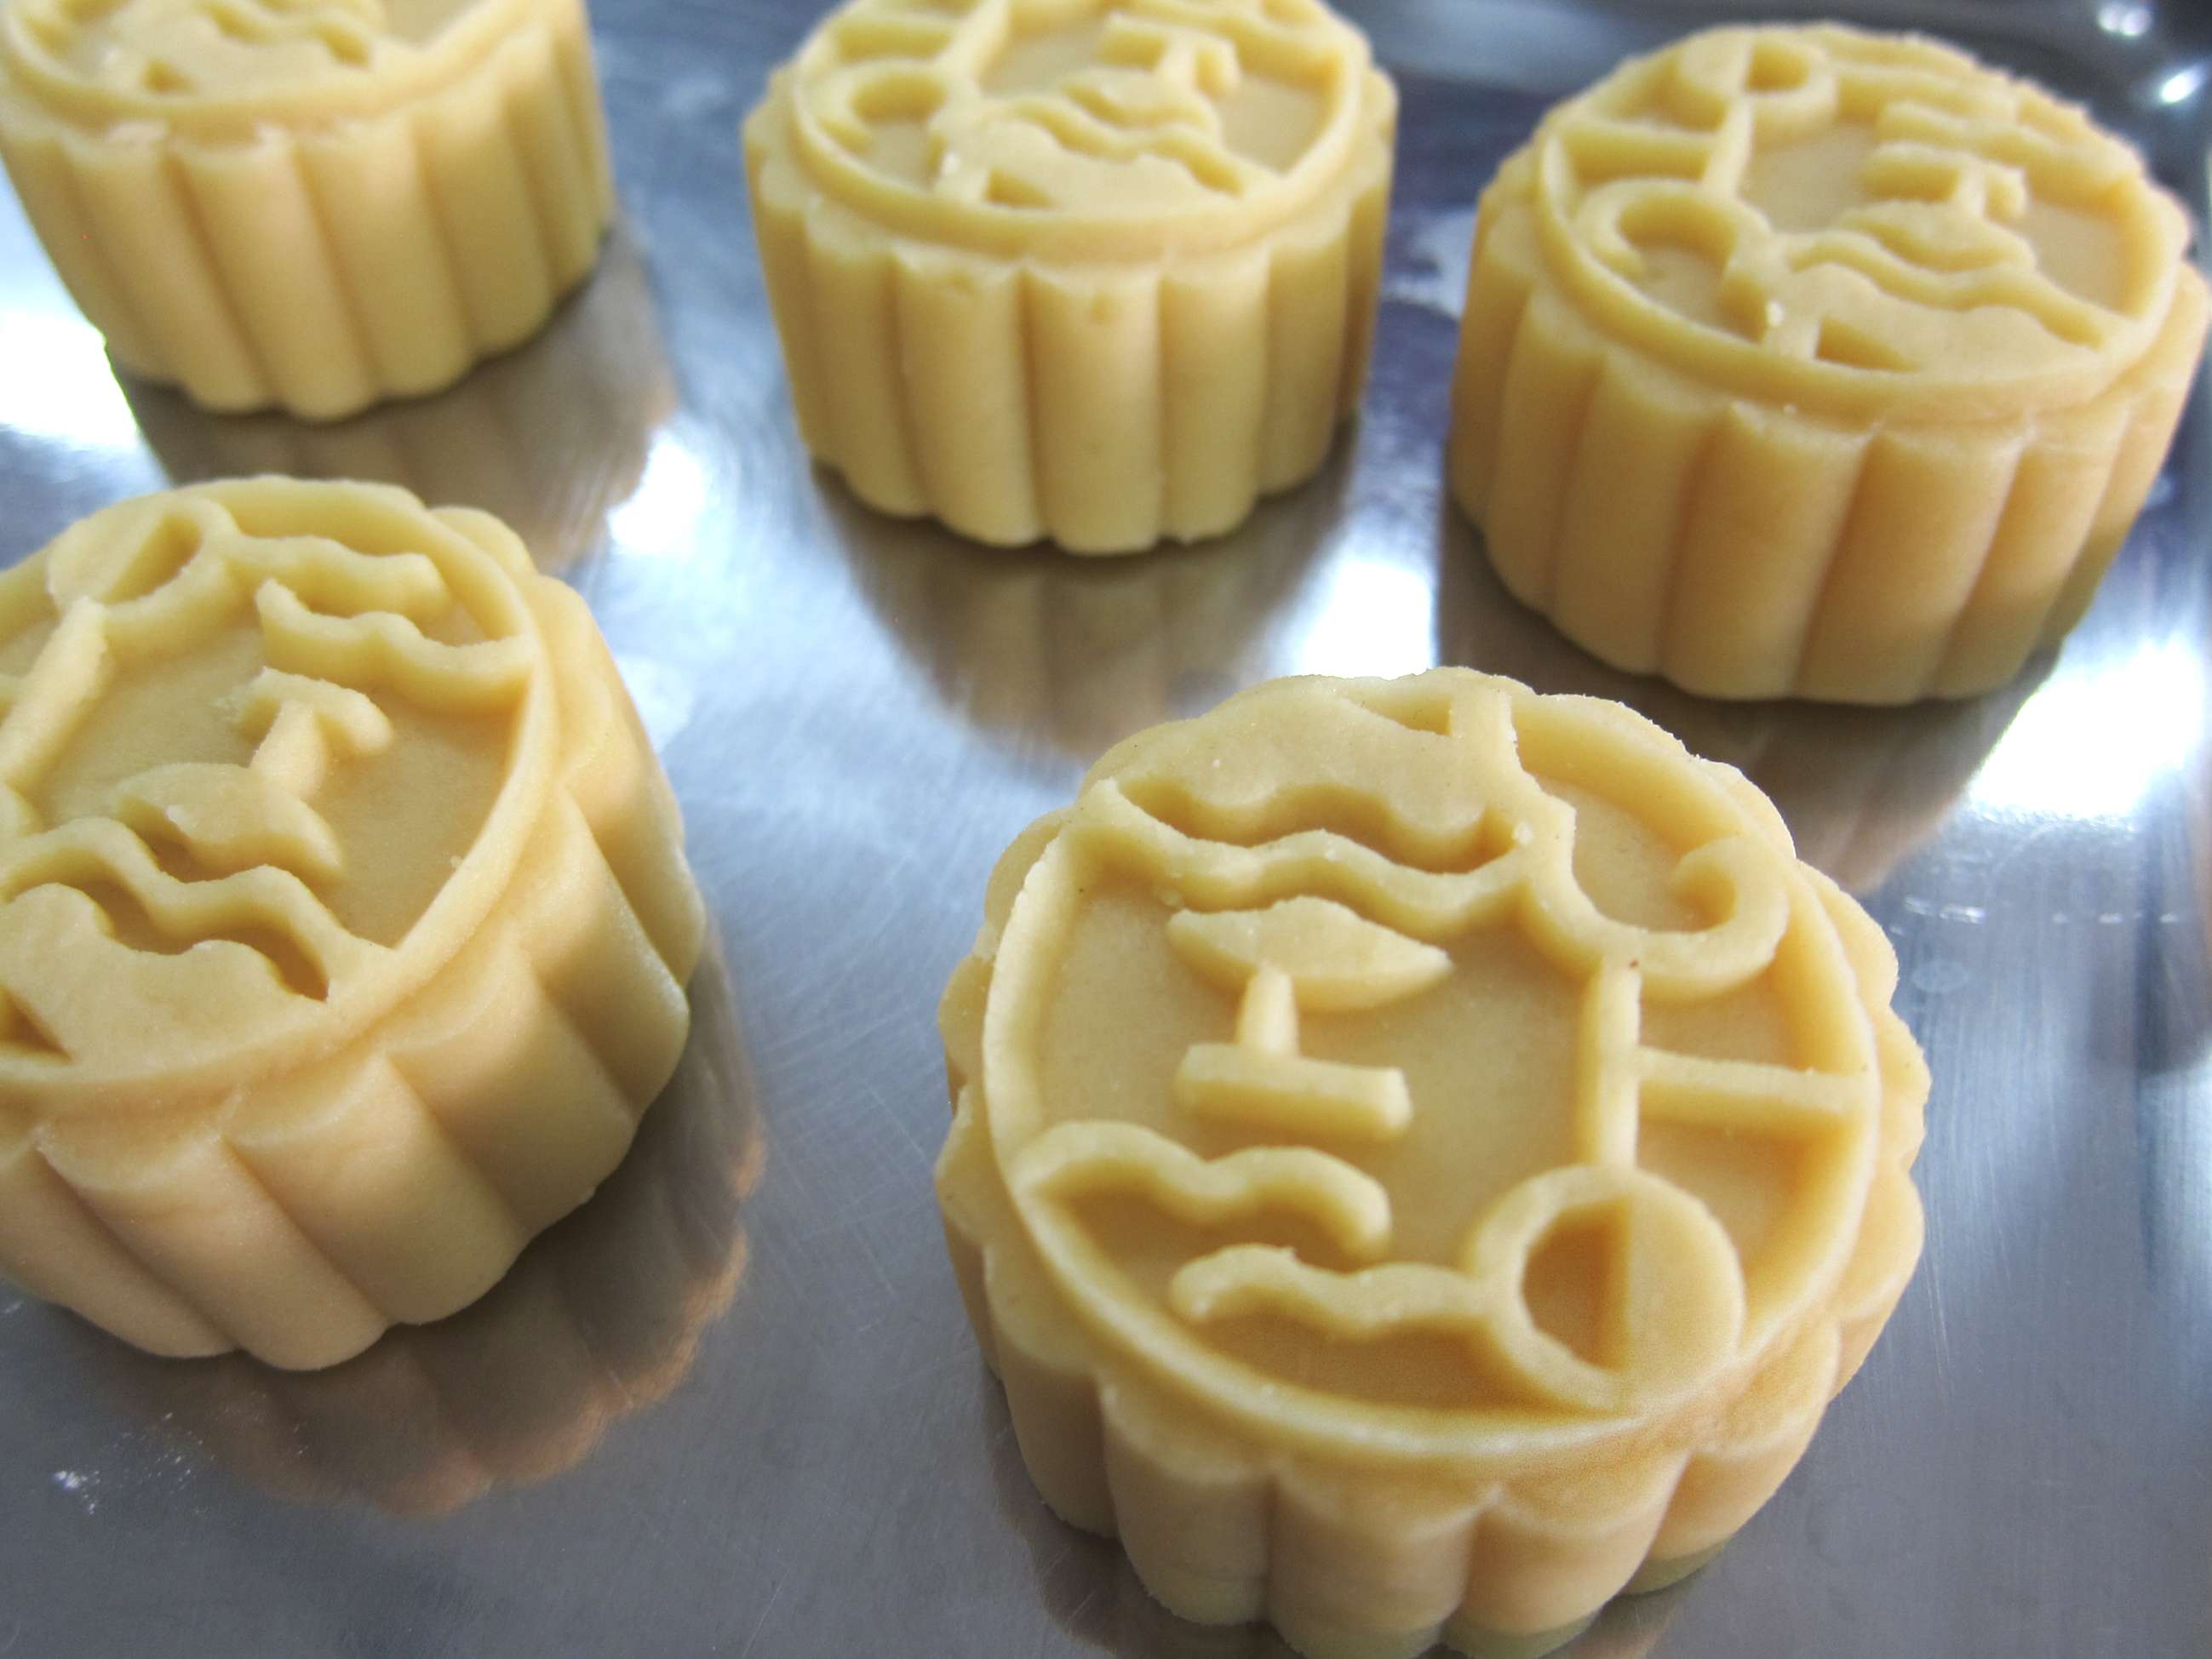 Special mooncakes adorned with Chinese writing made by the visually impaired aim to raise the awareness of people suffering from visual disabilities, in Hong Kong in July 2015. The mooncakes each came with the Chinese character for “Braille” inscribed on its surface. Photo: Handout